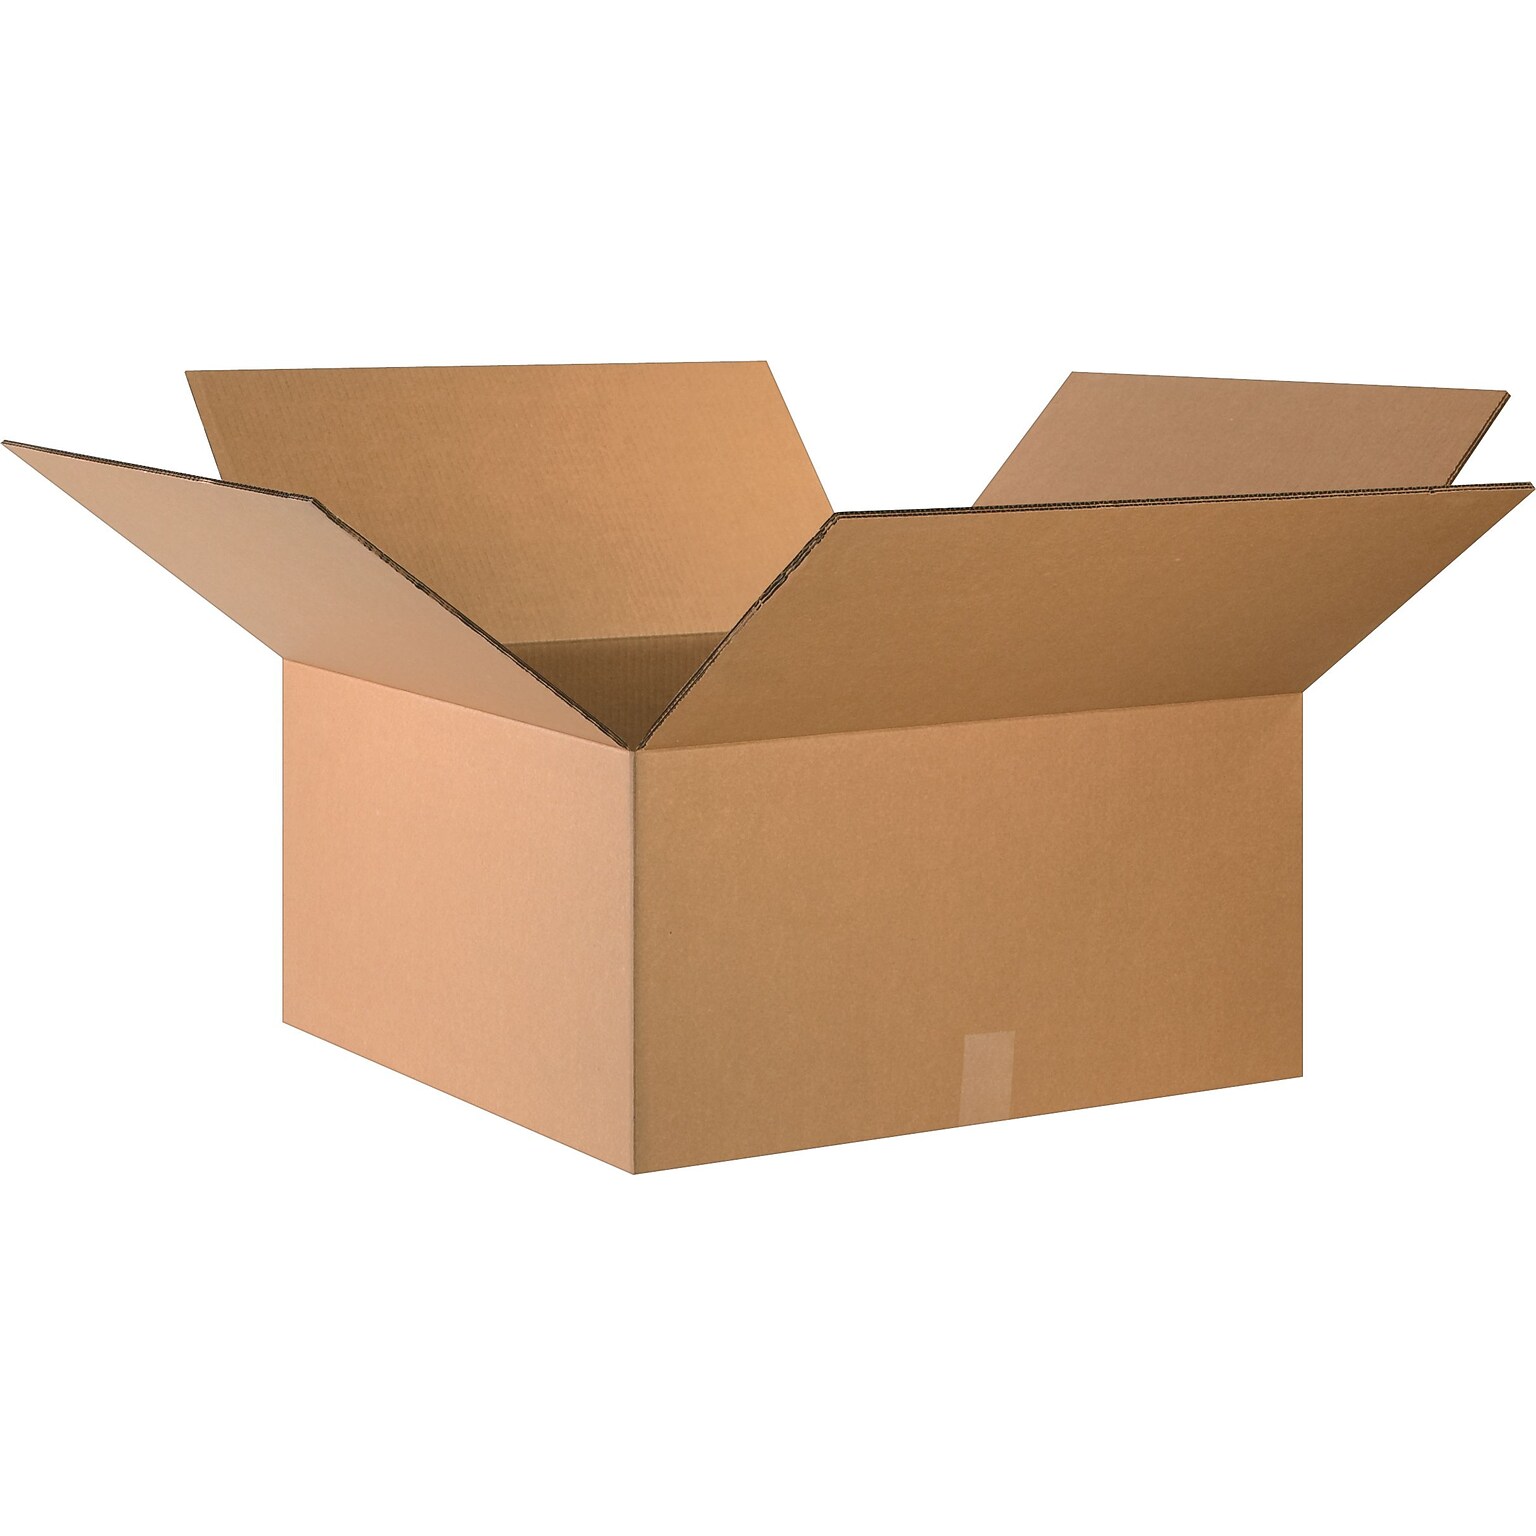 24 x 24 x 12 Shipping Boxes, 48 ECT Double Wall, Brown, 15/Bundle (BS242412HDDW)